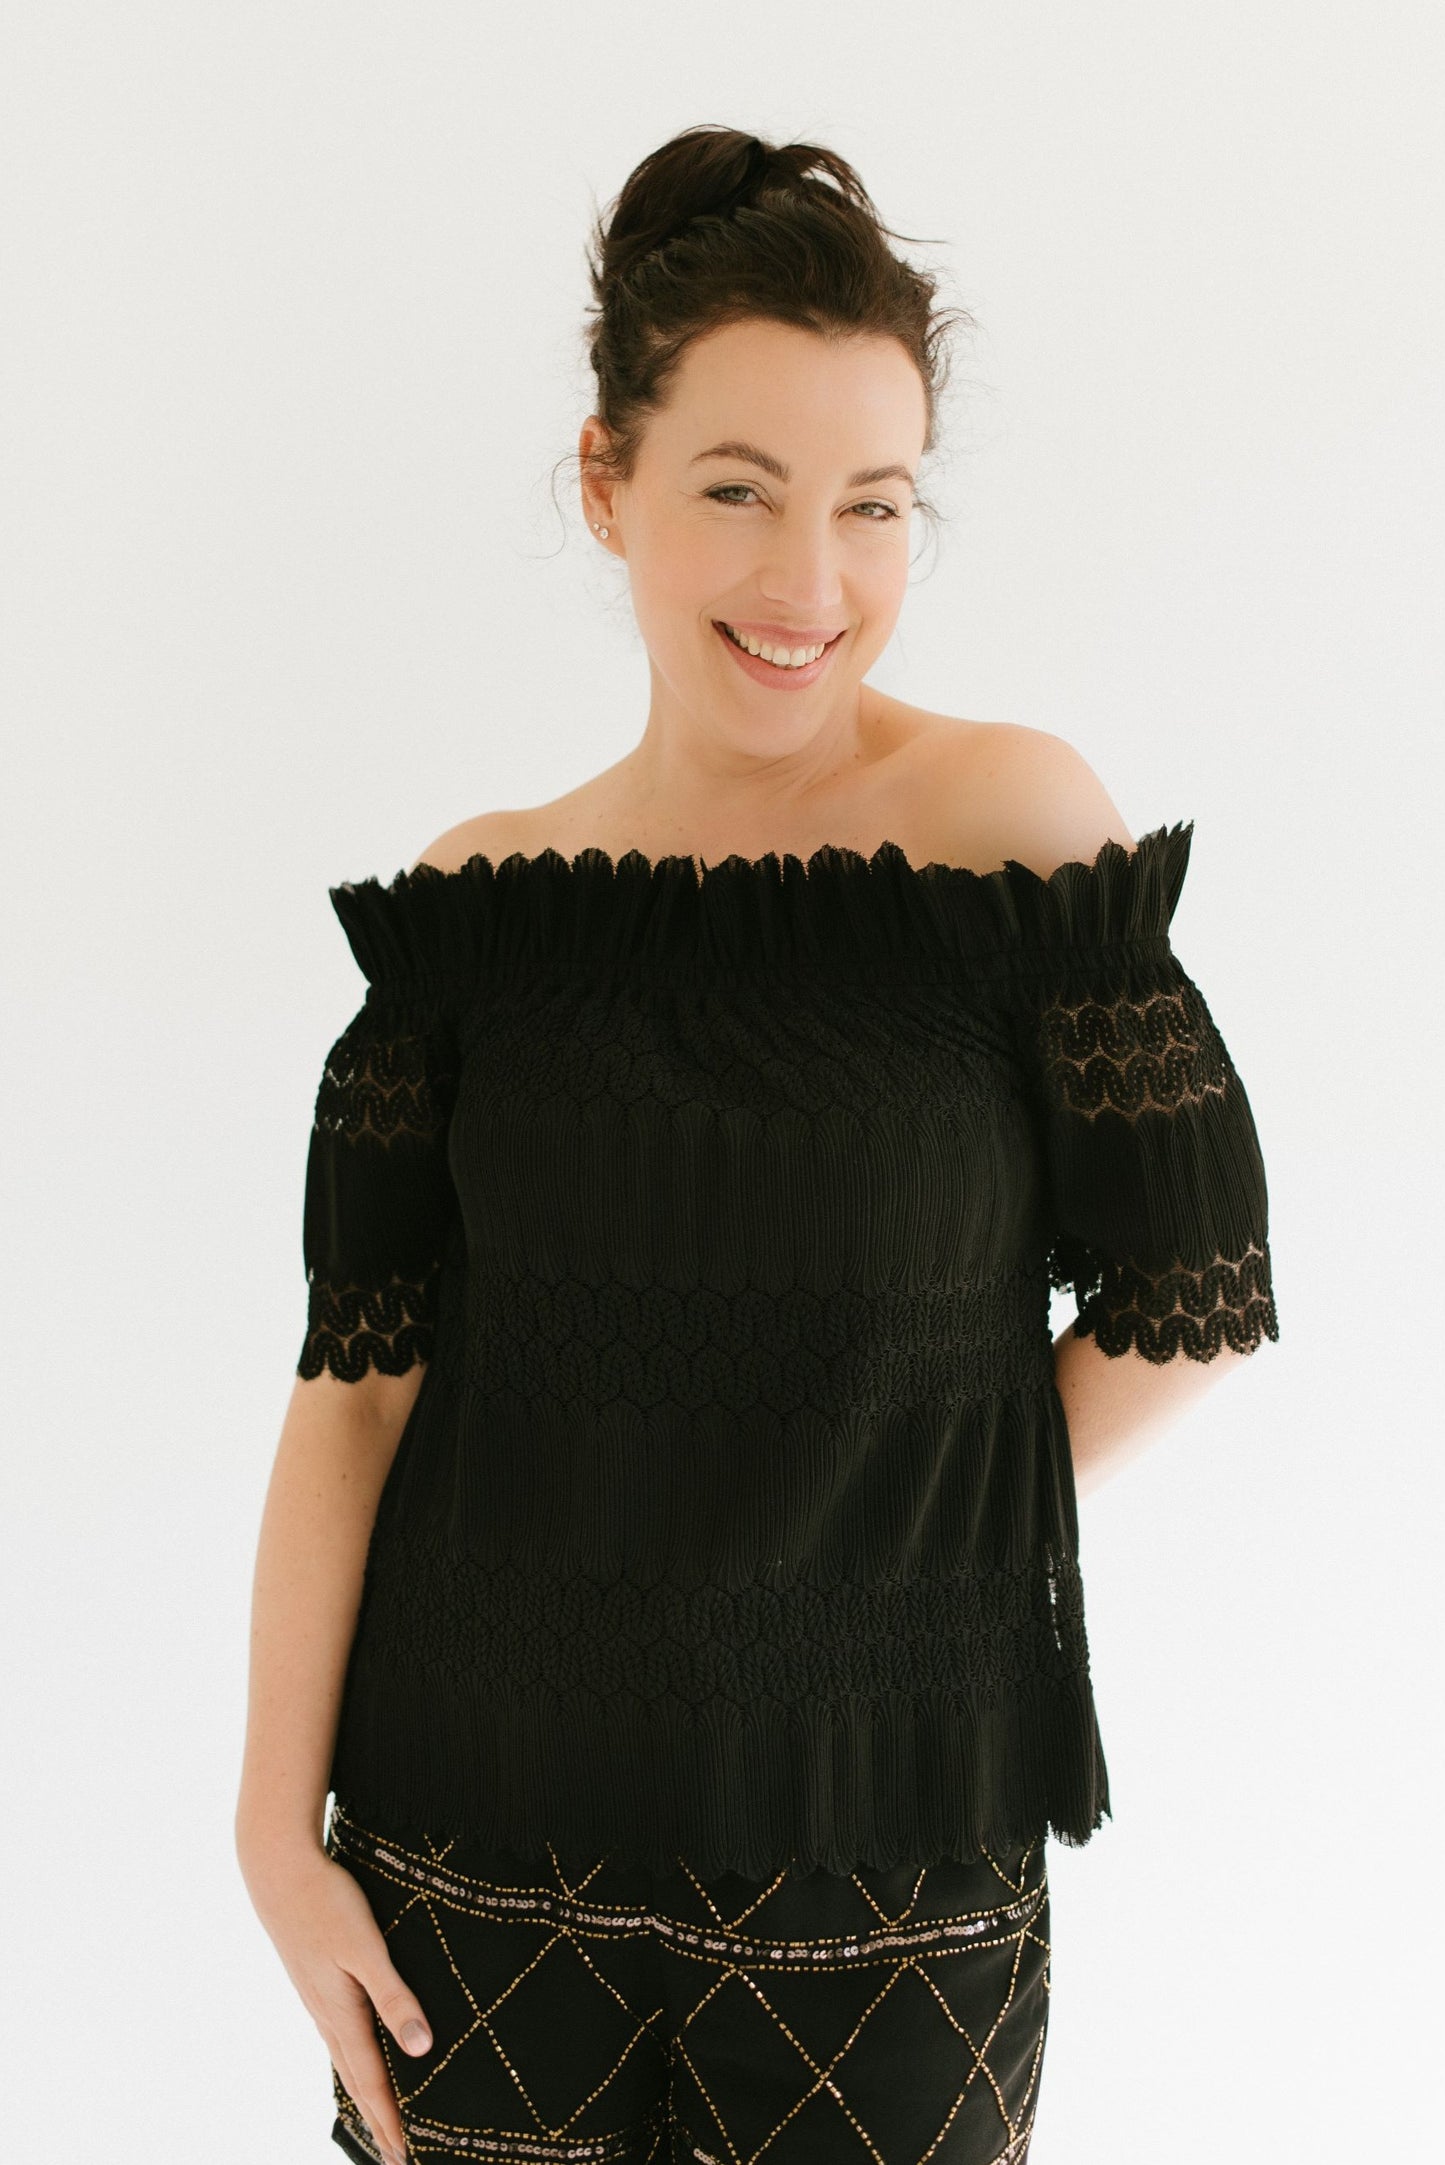 Made from hand cut lace, The Anneen Henze Becca Cut-Out Lace Top, is that extra special investment piece that will never go out of fashion! She will always make you feel beautiful and has versatility written all over it. Wear it with your favourite summer bottom, add a sandal, wedge or high heel, she is really suited for any occasion this Spring/Summer. She is designed with an A-line silhouette.